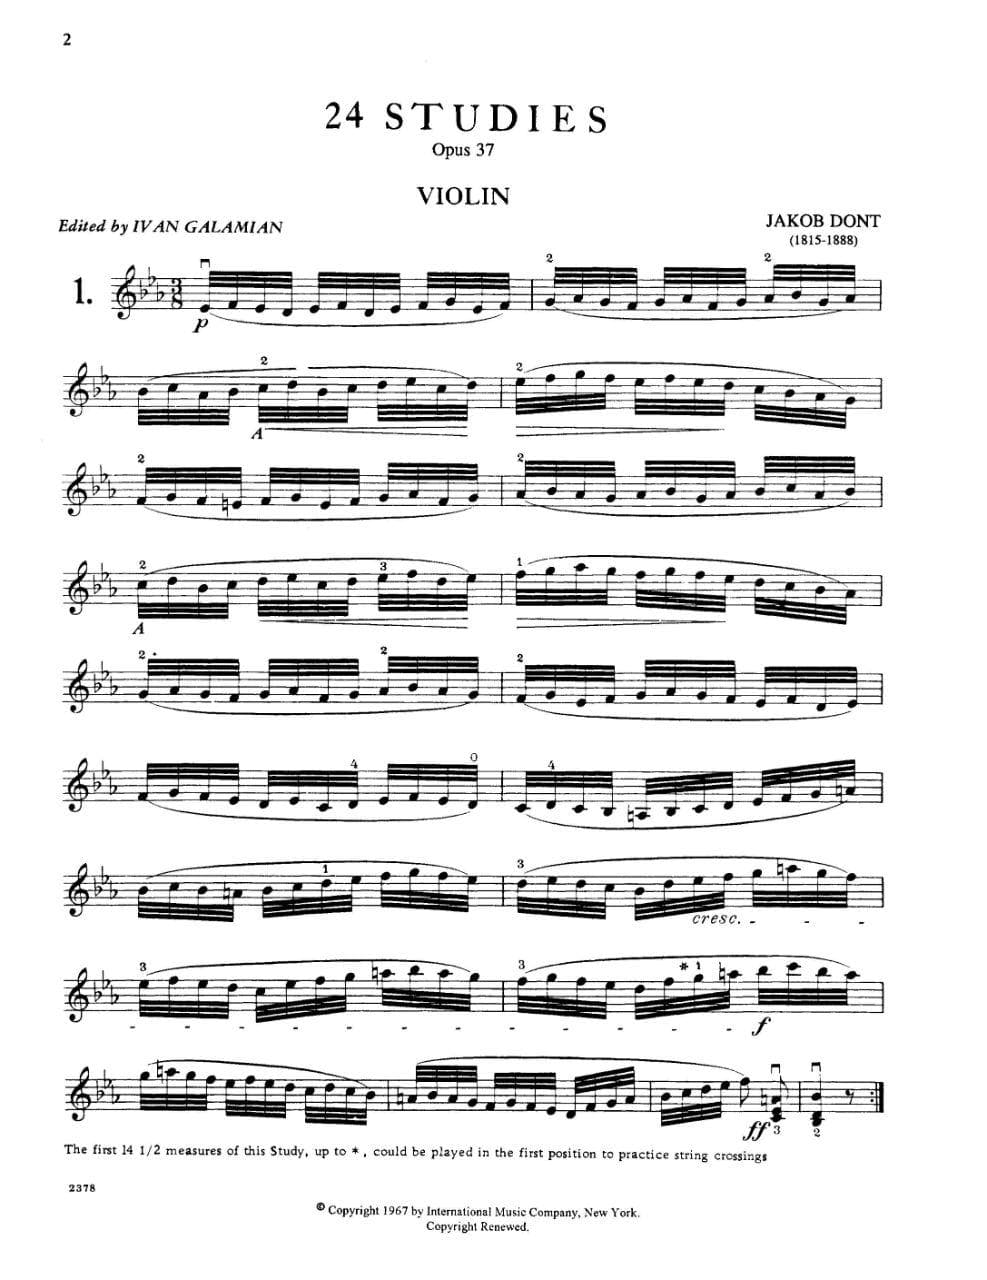 Dont, Jakob - 24 Studies, Op 37: Preparatory to Kreutzer and Rode Studies - Violin solo - edited by Ivan Galamian - International Edition